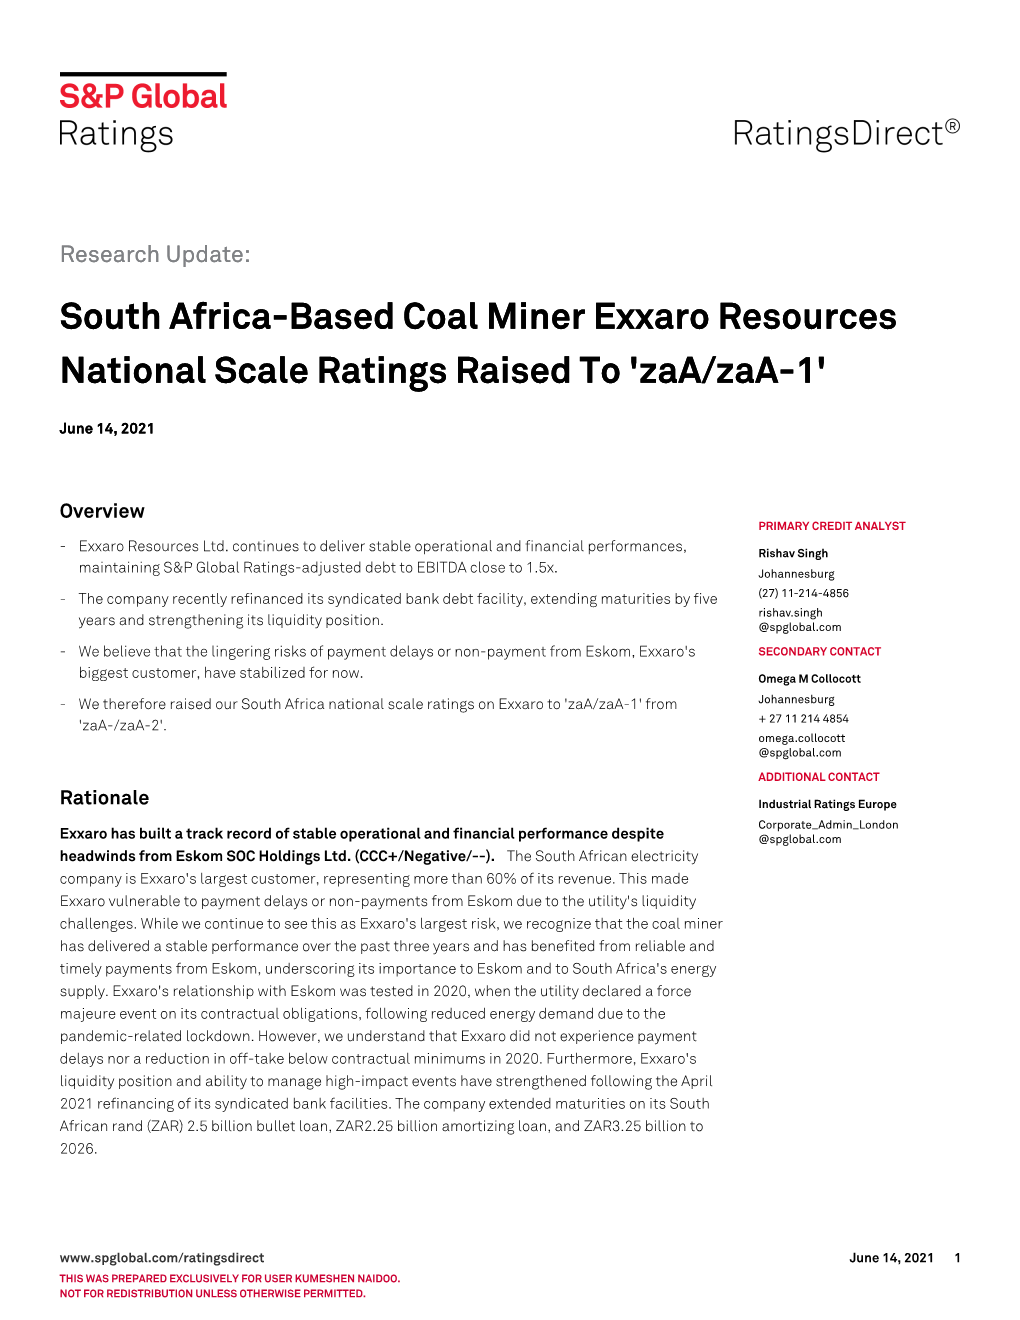 South Africa-Based Coal Miner Exxaro Resources National Scale Ratings Raised to 'Zaa/Zaa-1'